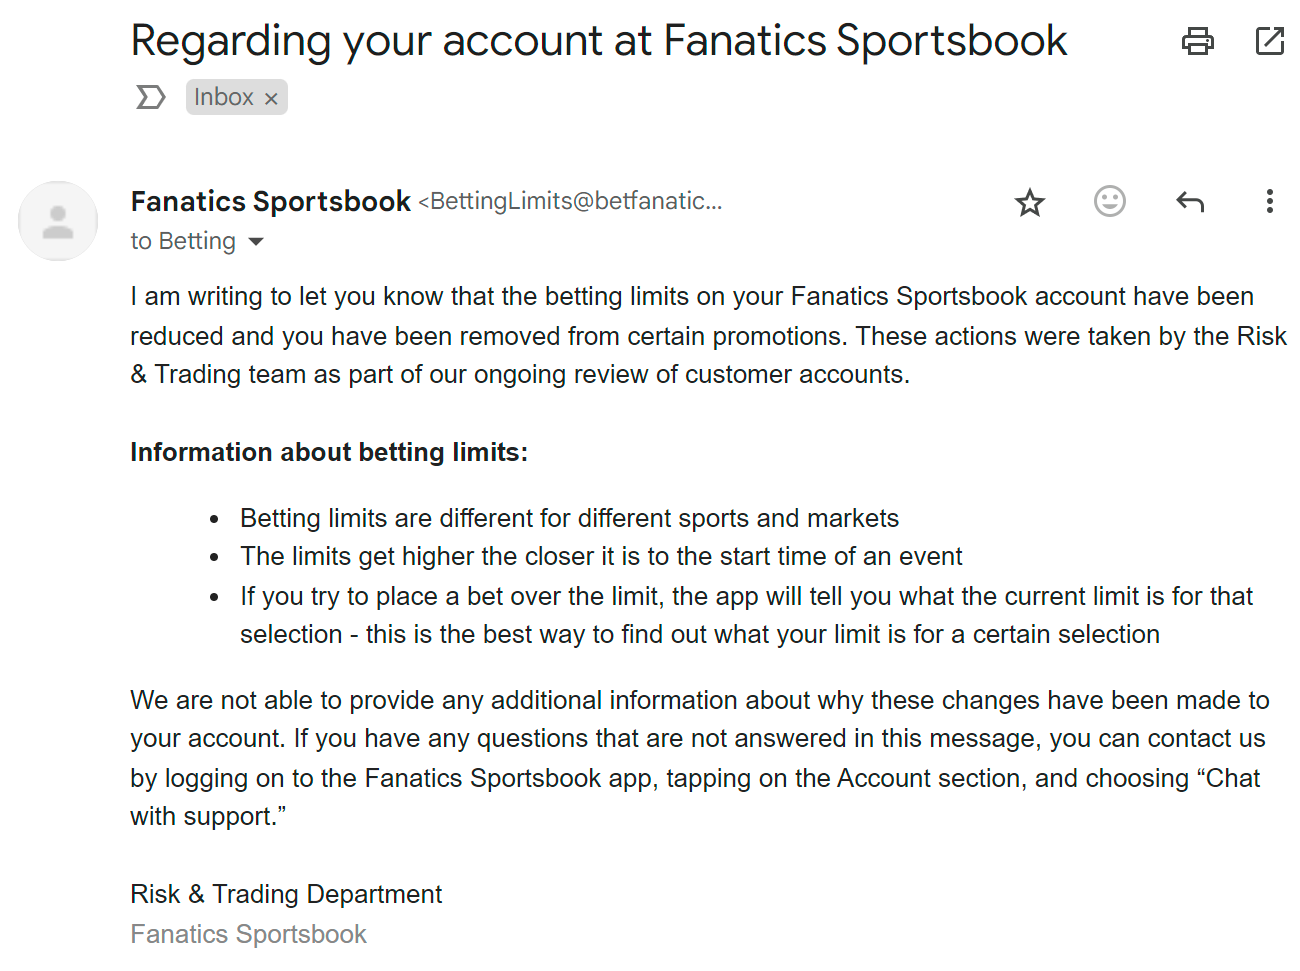 Email from Fanatics sportsbook saying they are imposing limits on a bettor